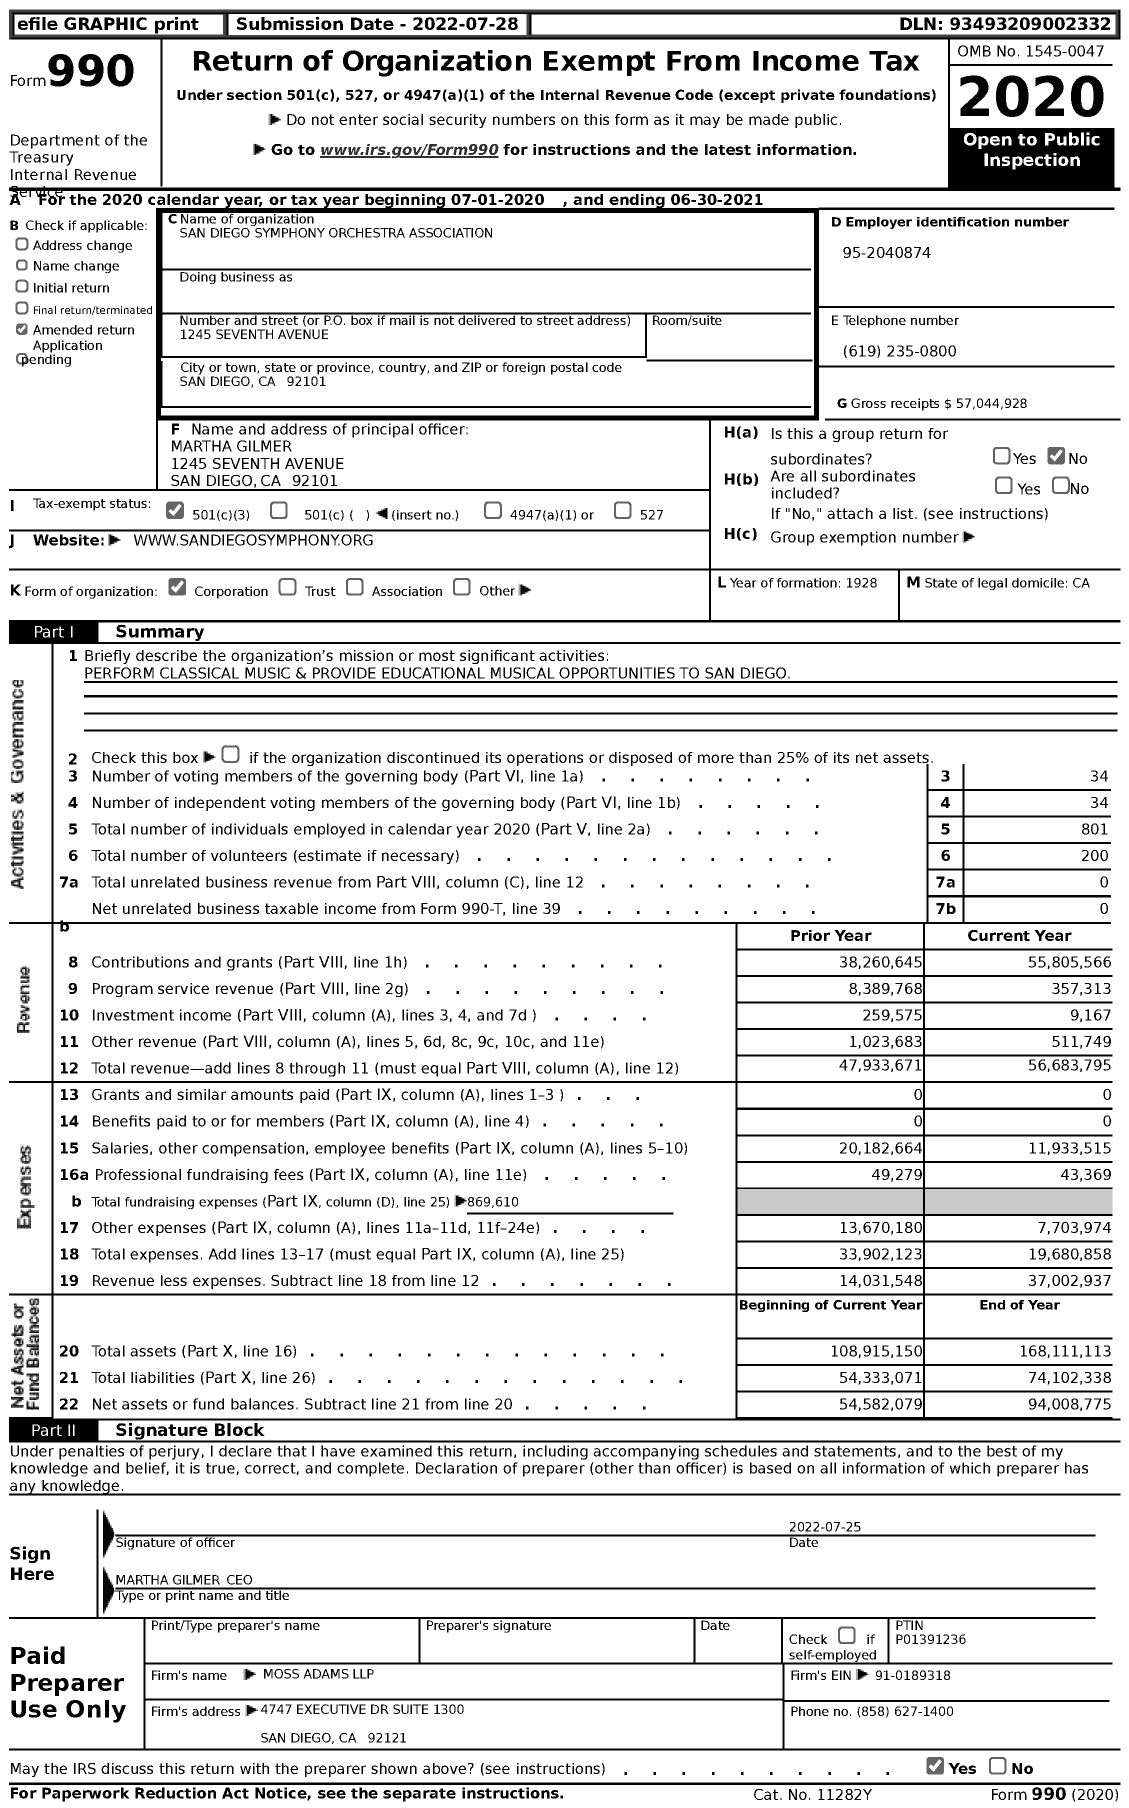 Image of first page of 2020 Form 990 for The San Diego Symphony Orchestra Association